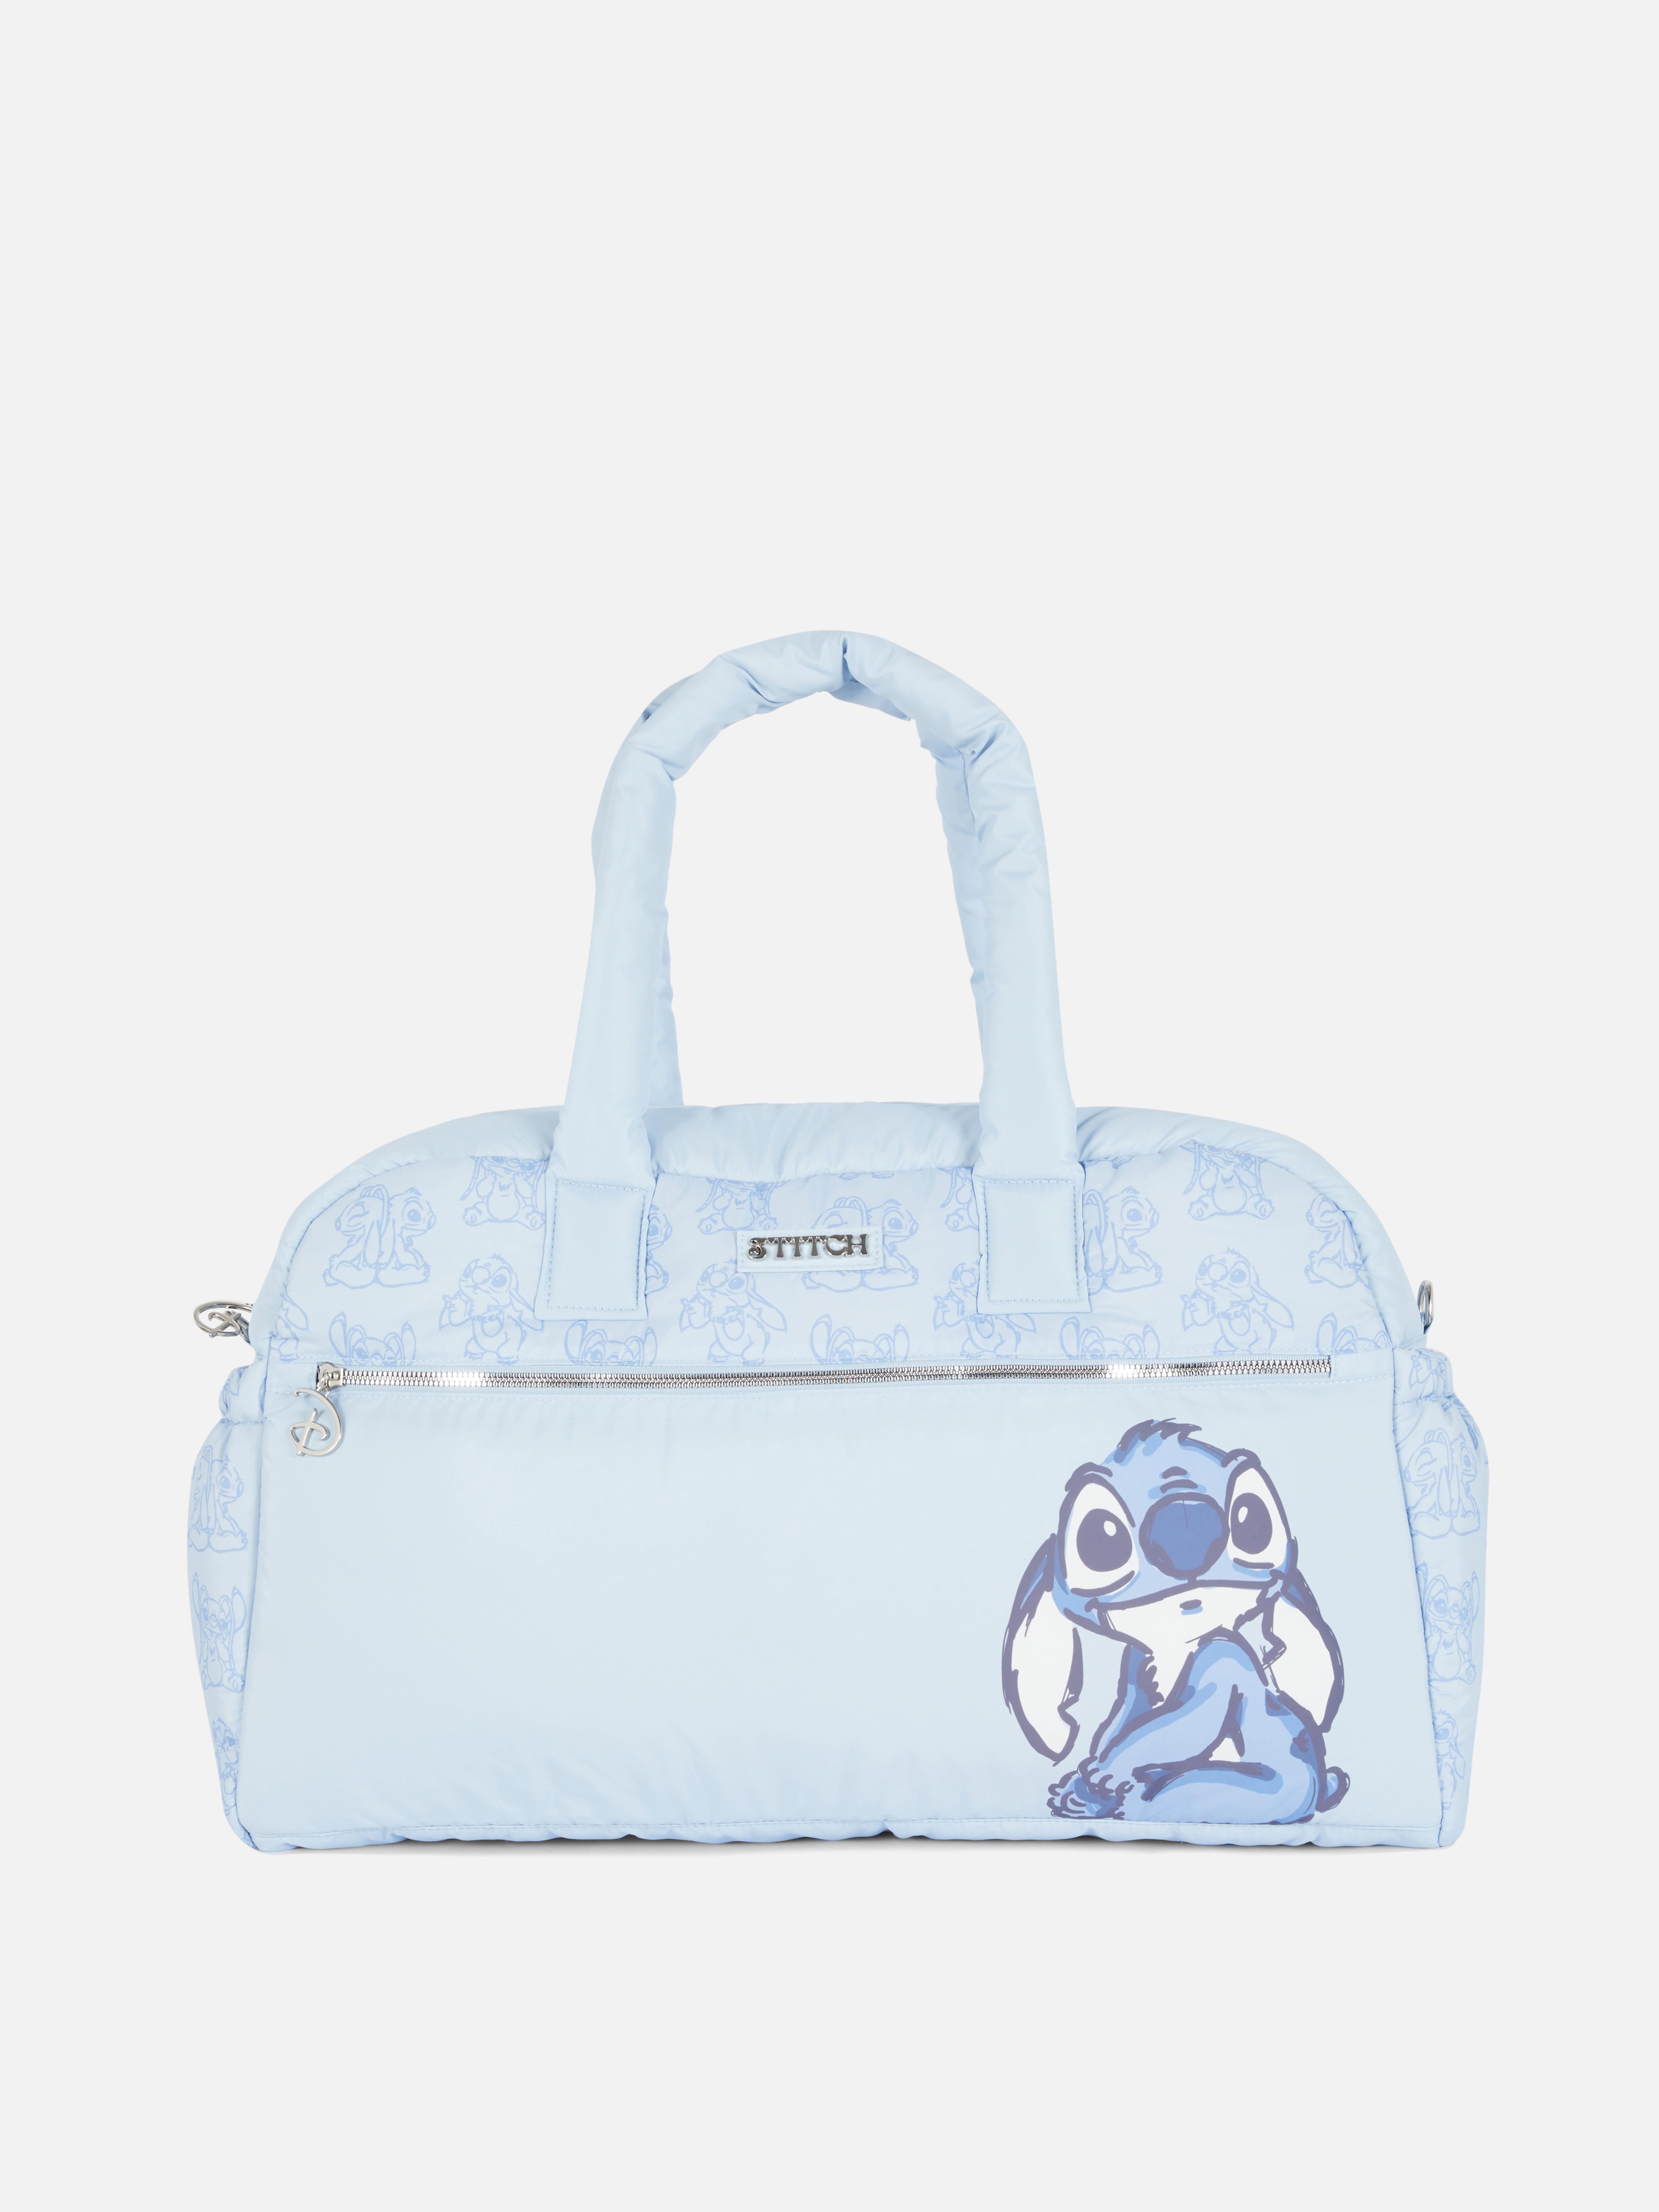 Disney's Lilo and Stitch Panel Weekender Bag